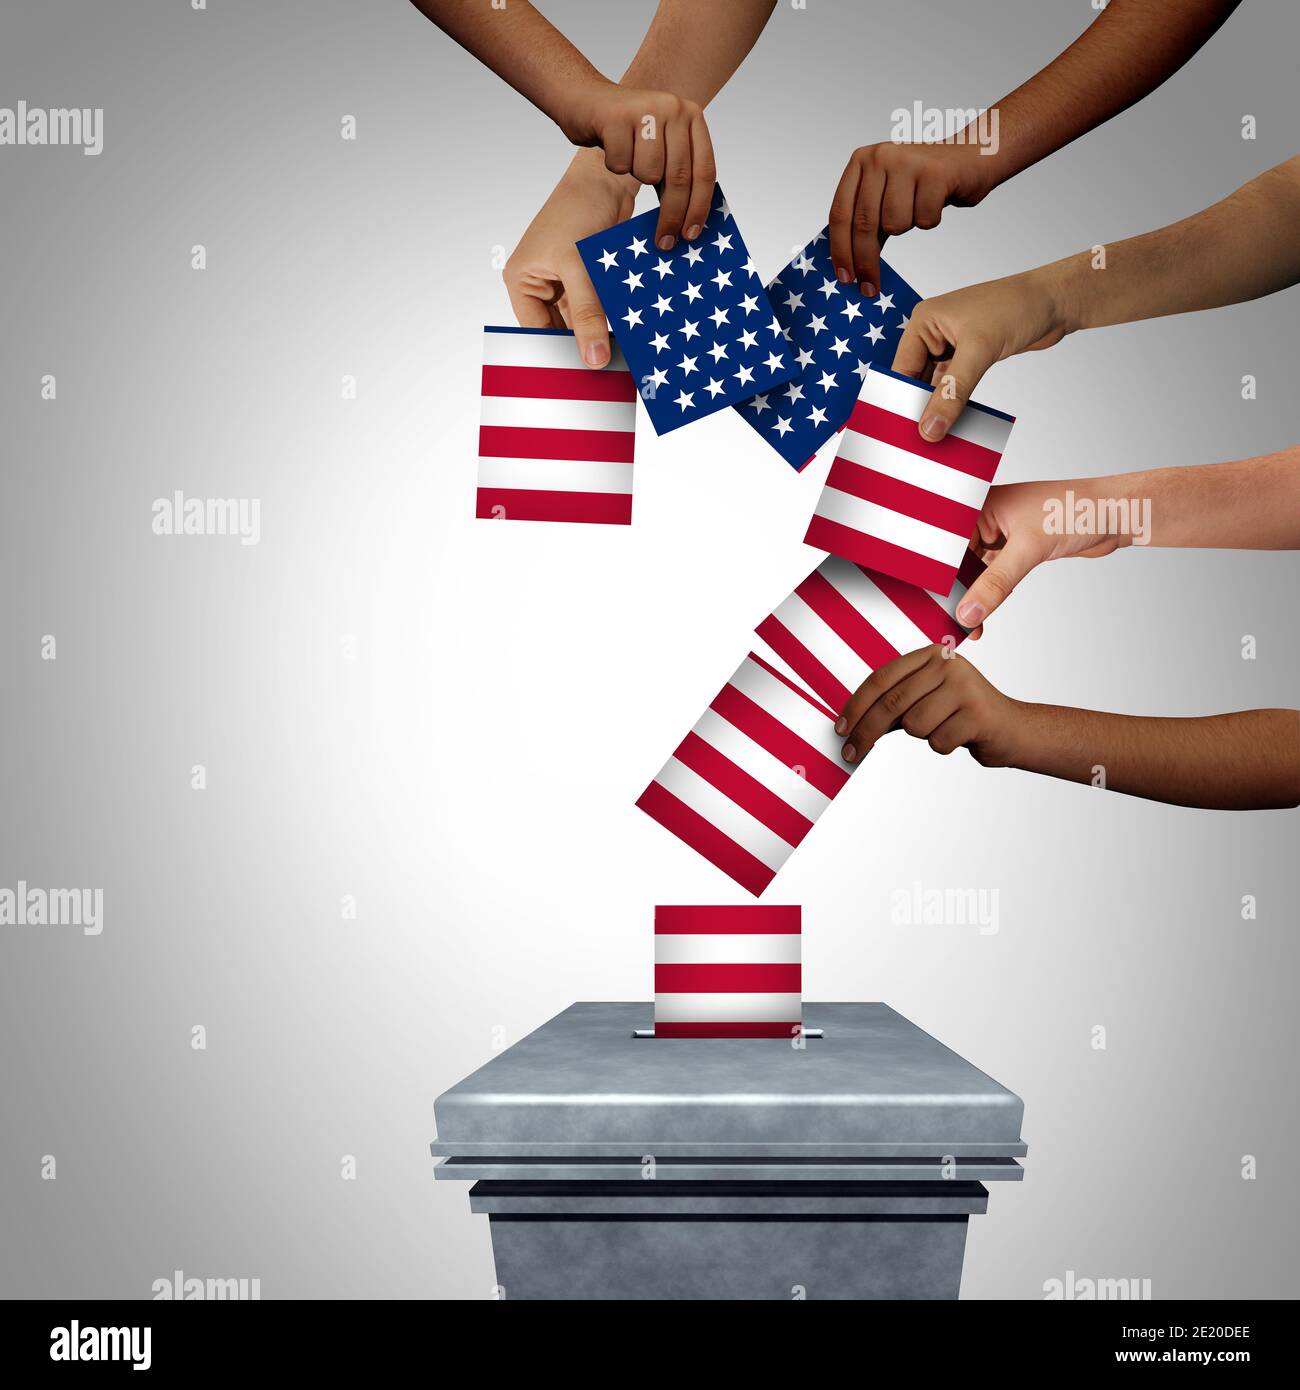 United States vote question and American community vote or US voting uncertainty concept as diverse hands casting USA ballots at a polling station. Stock Photo